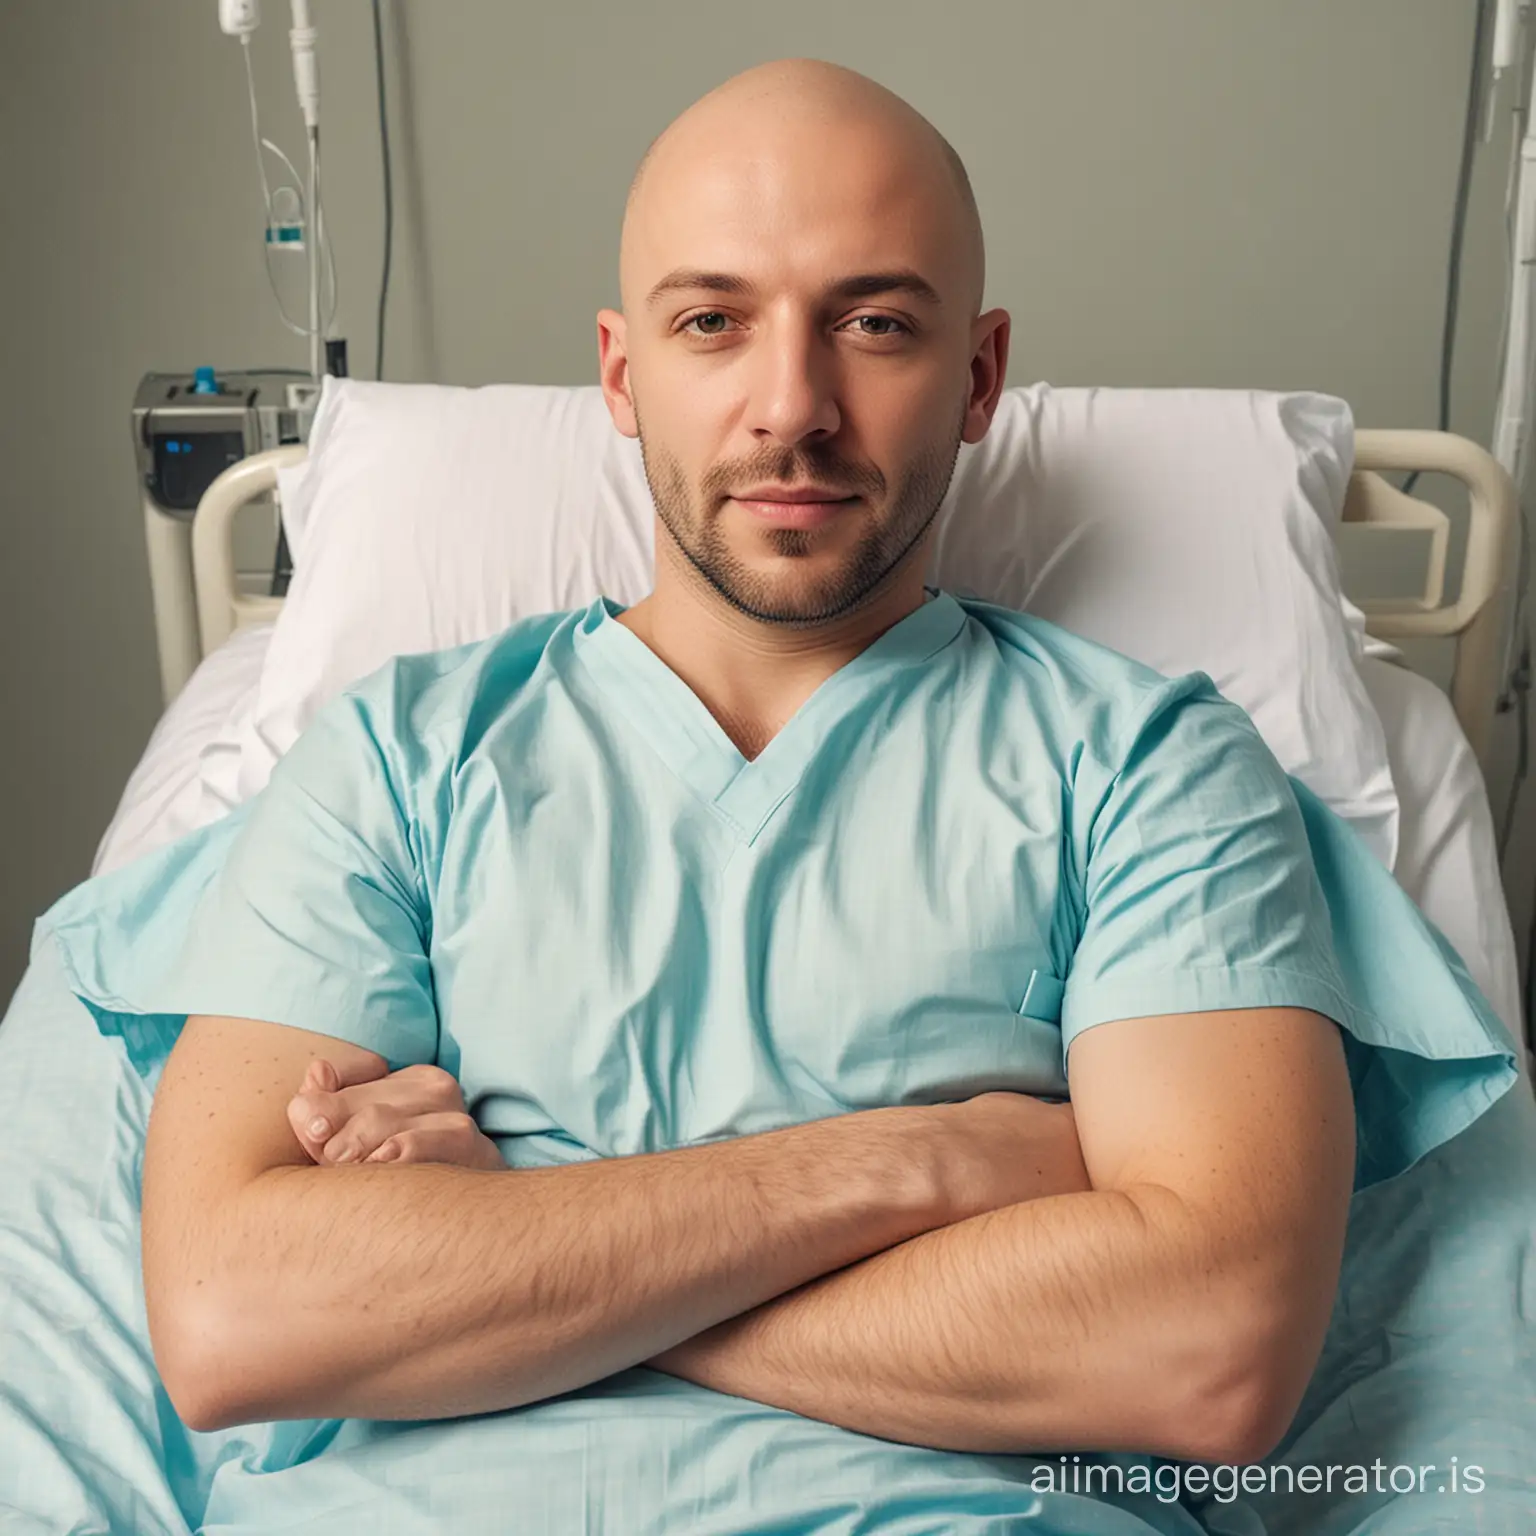 Bald man with short lying on a hospital bed